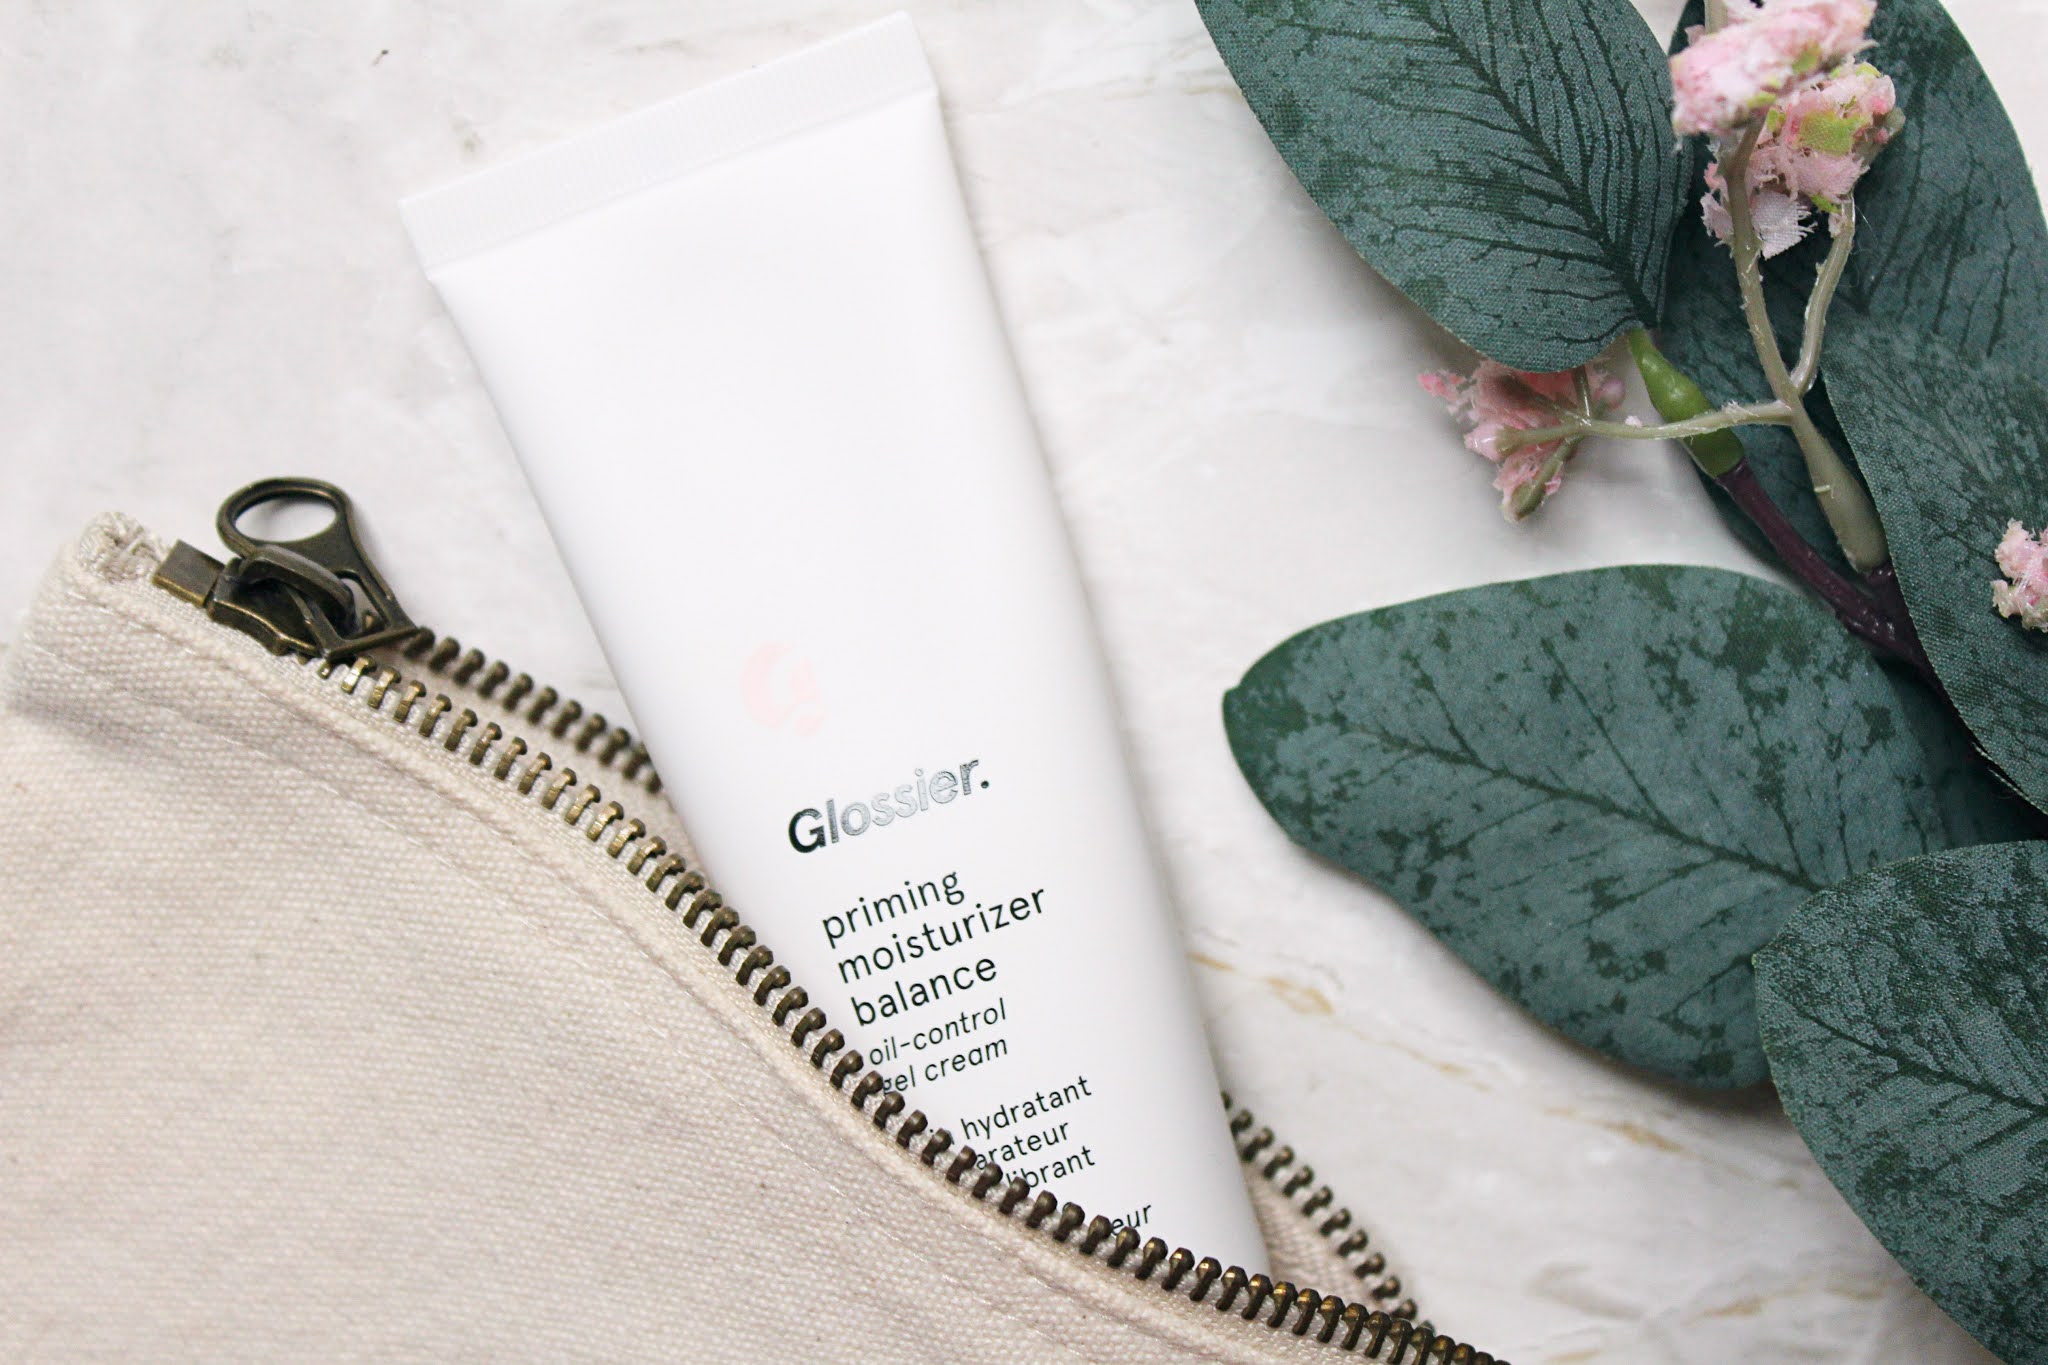 Glossier Priming Moisturizer Balance Review (+ Discount Code)